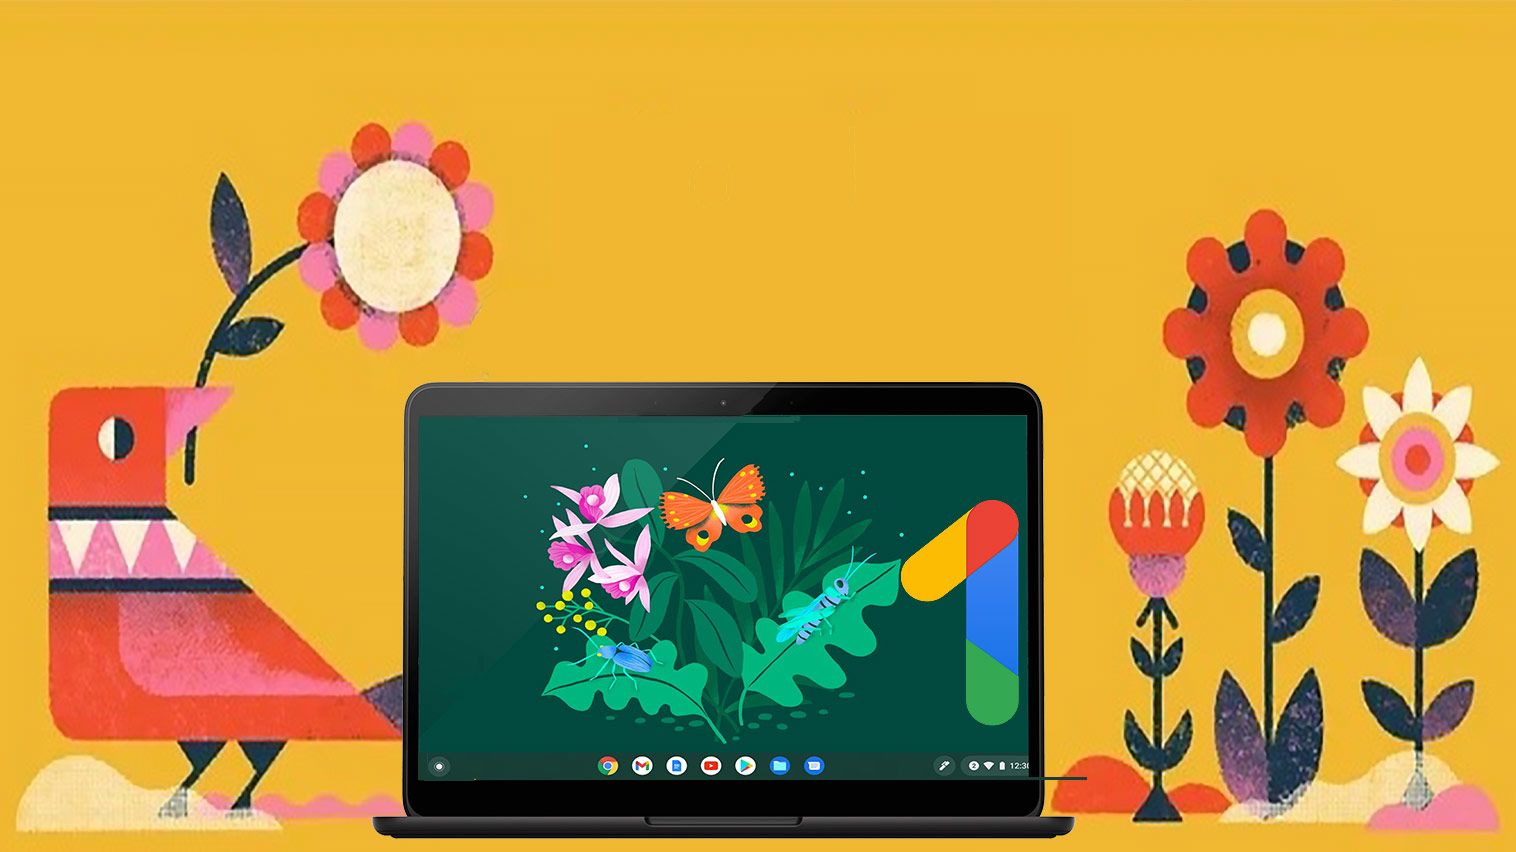 An illustration of red bird, Chromebook, and various flowers against a saffron background